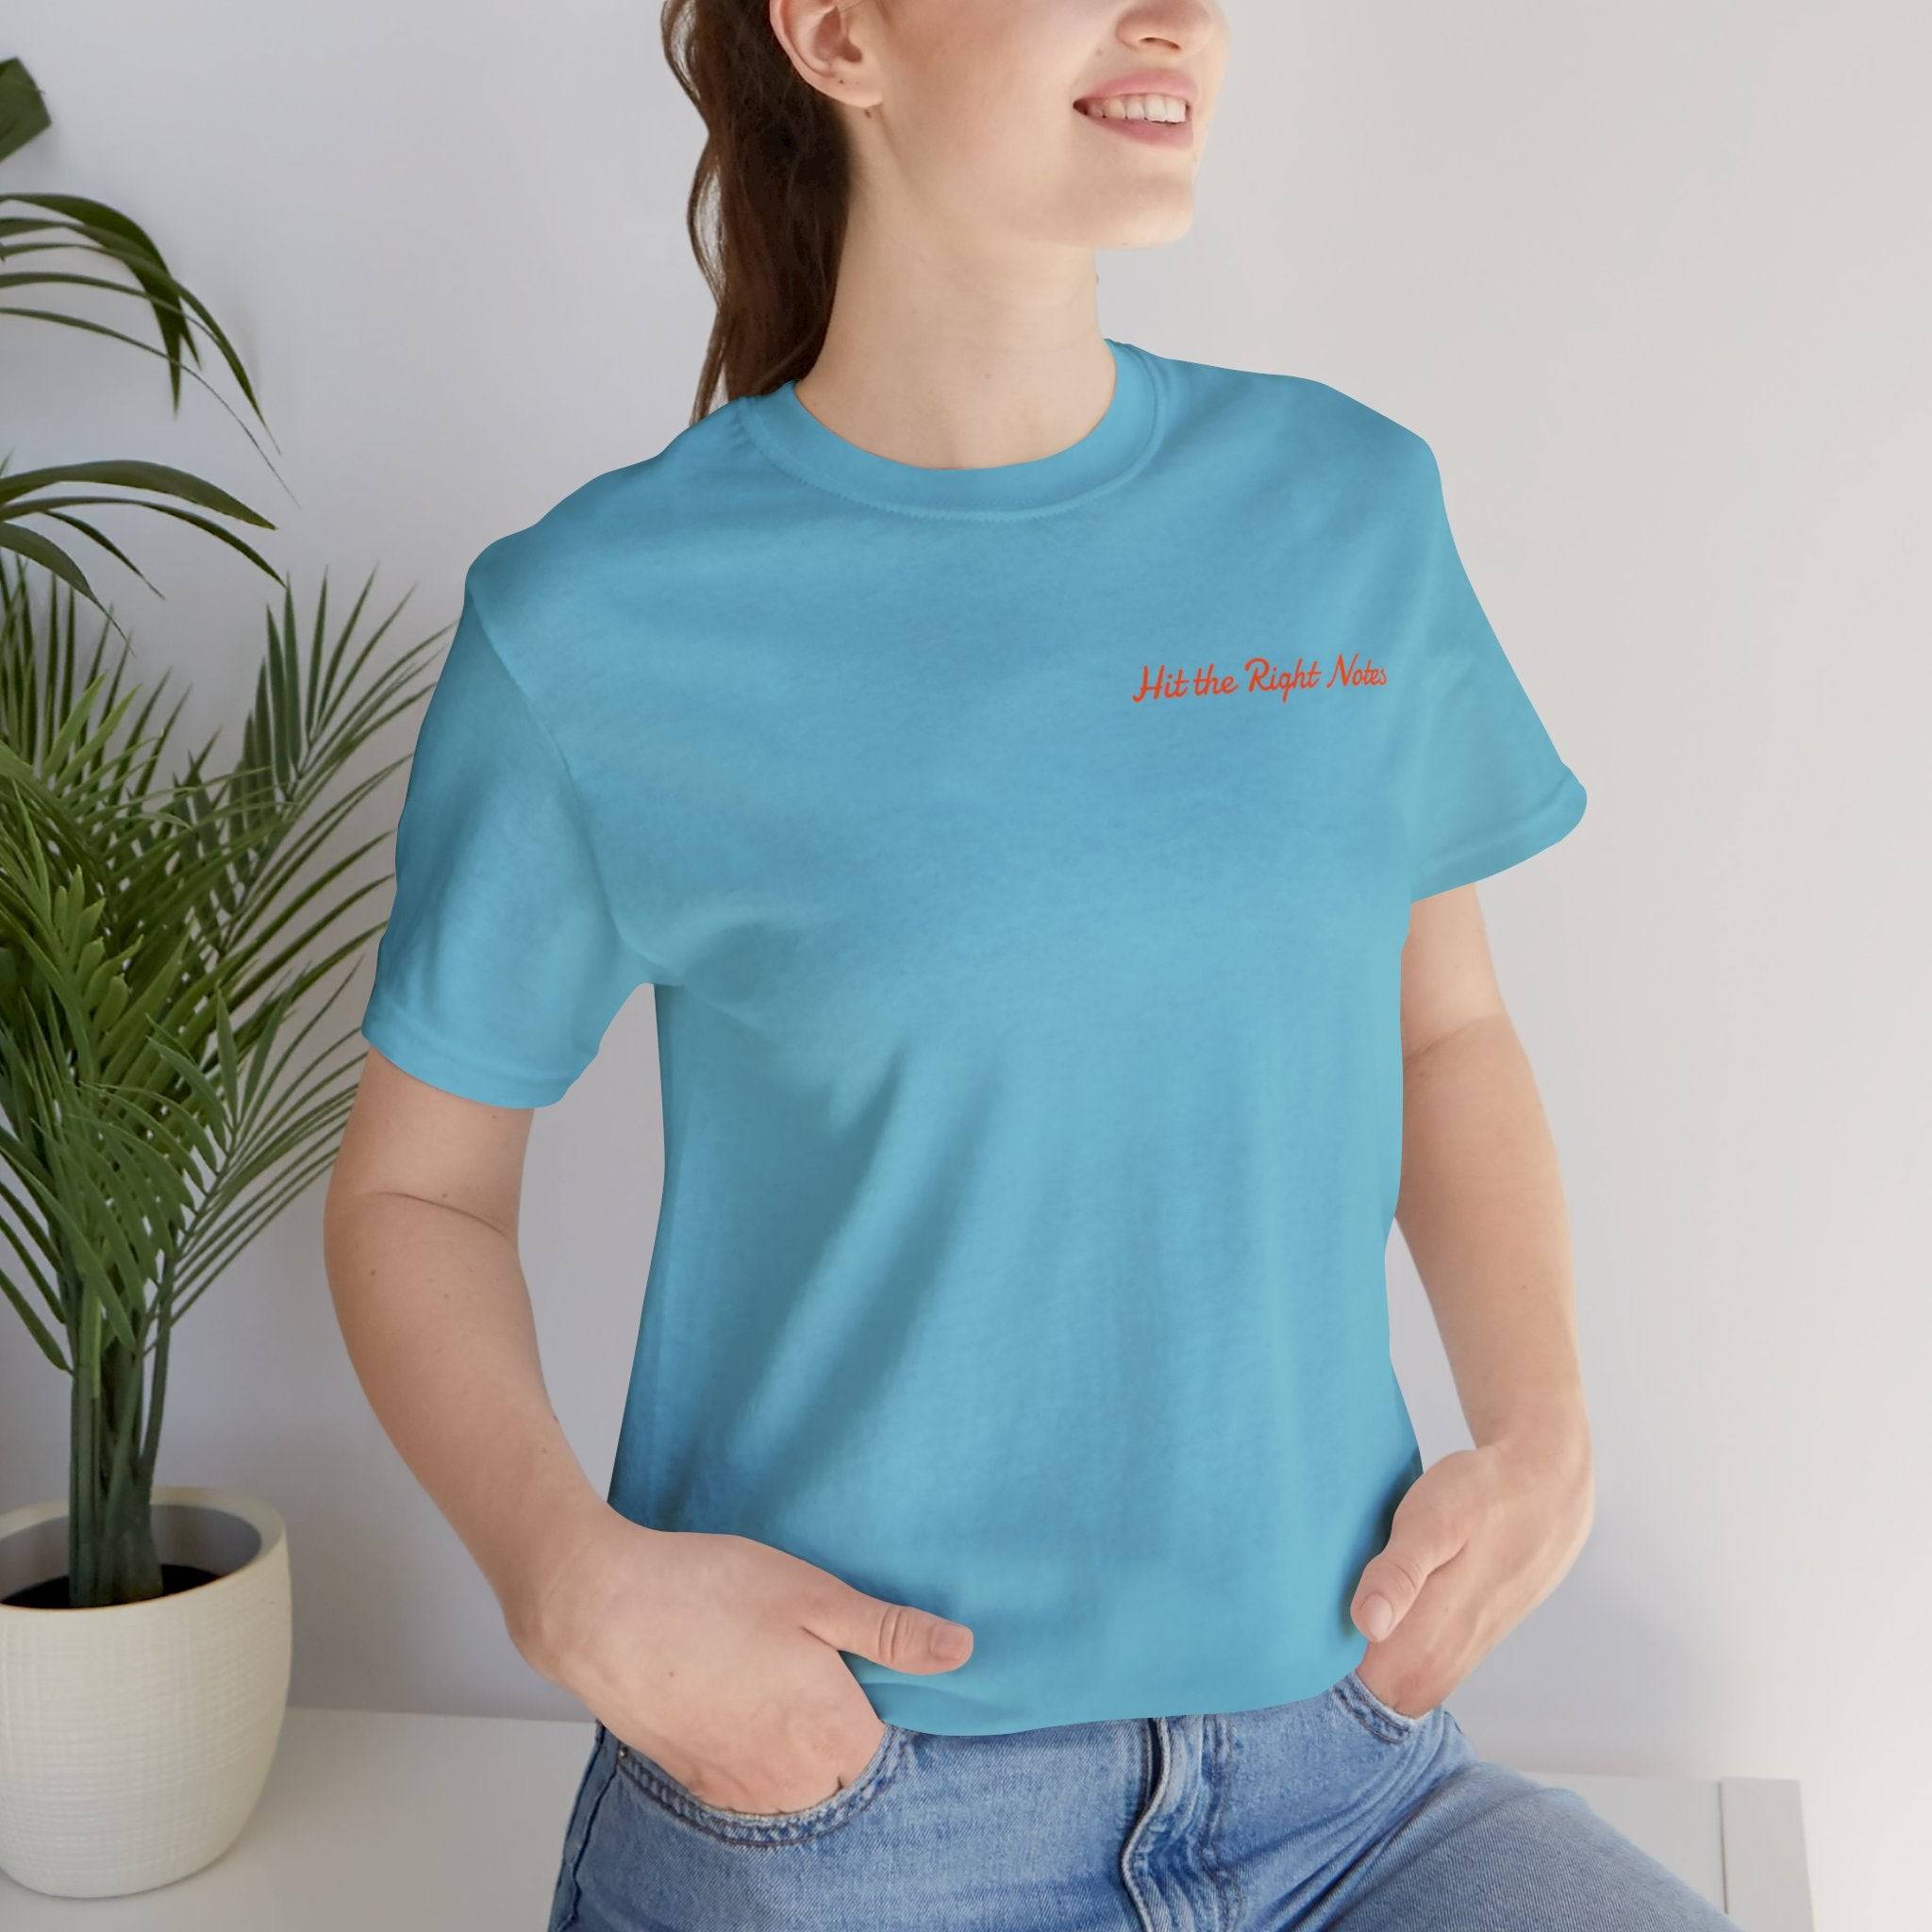 Hit the Right Notes Jersey Tee - Bella+Canvas 3001 Heather Mauve Classic Tee Comfortable Tee Cotton T-Shirt Graphic Tee JerseyTee Statement Shirt T-shirt Tee Unisex Apparel T-Shirt 1003724842204234080_2048_18a11fd2-3261-4415-a7e8-6ee9cd906259 Printify